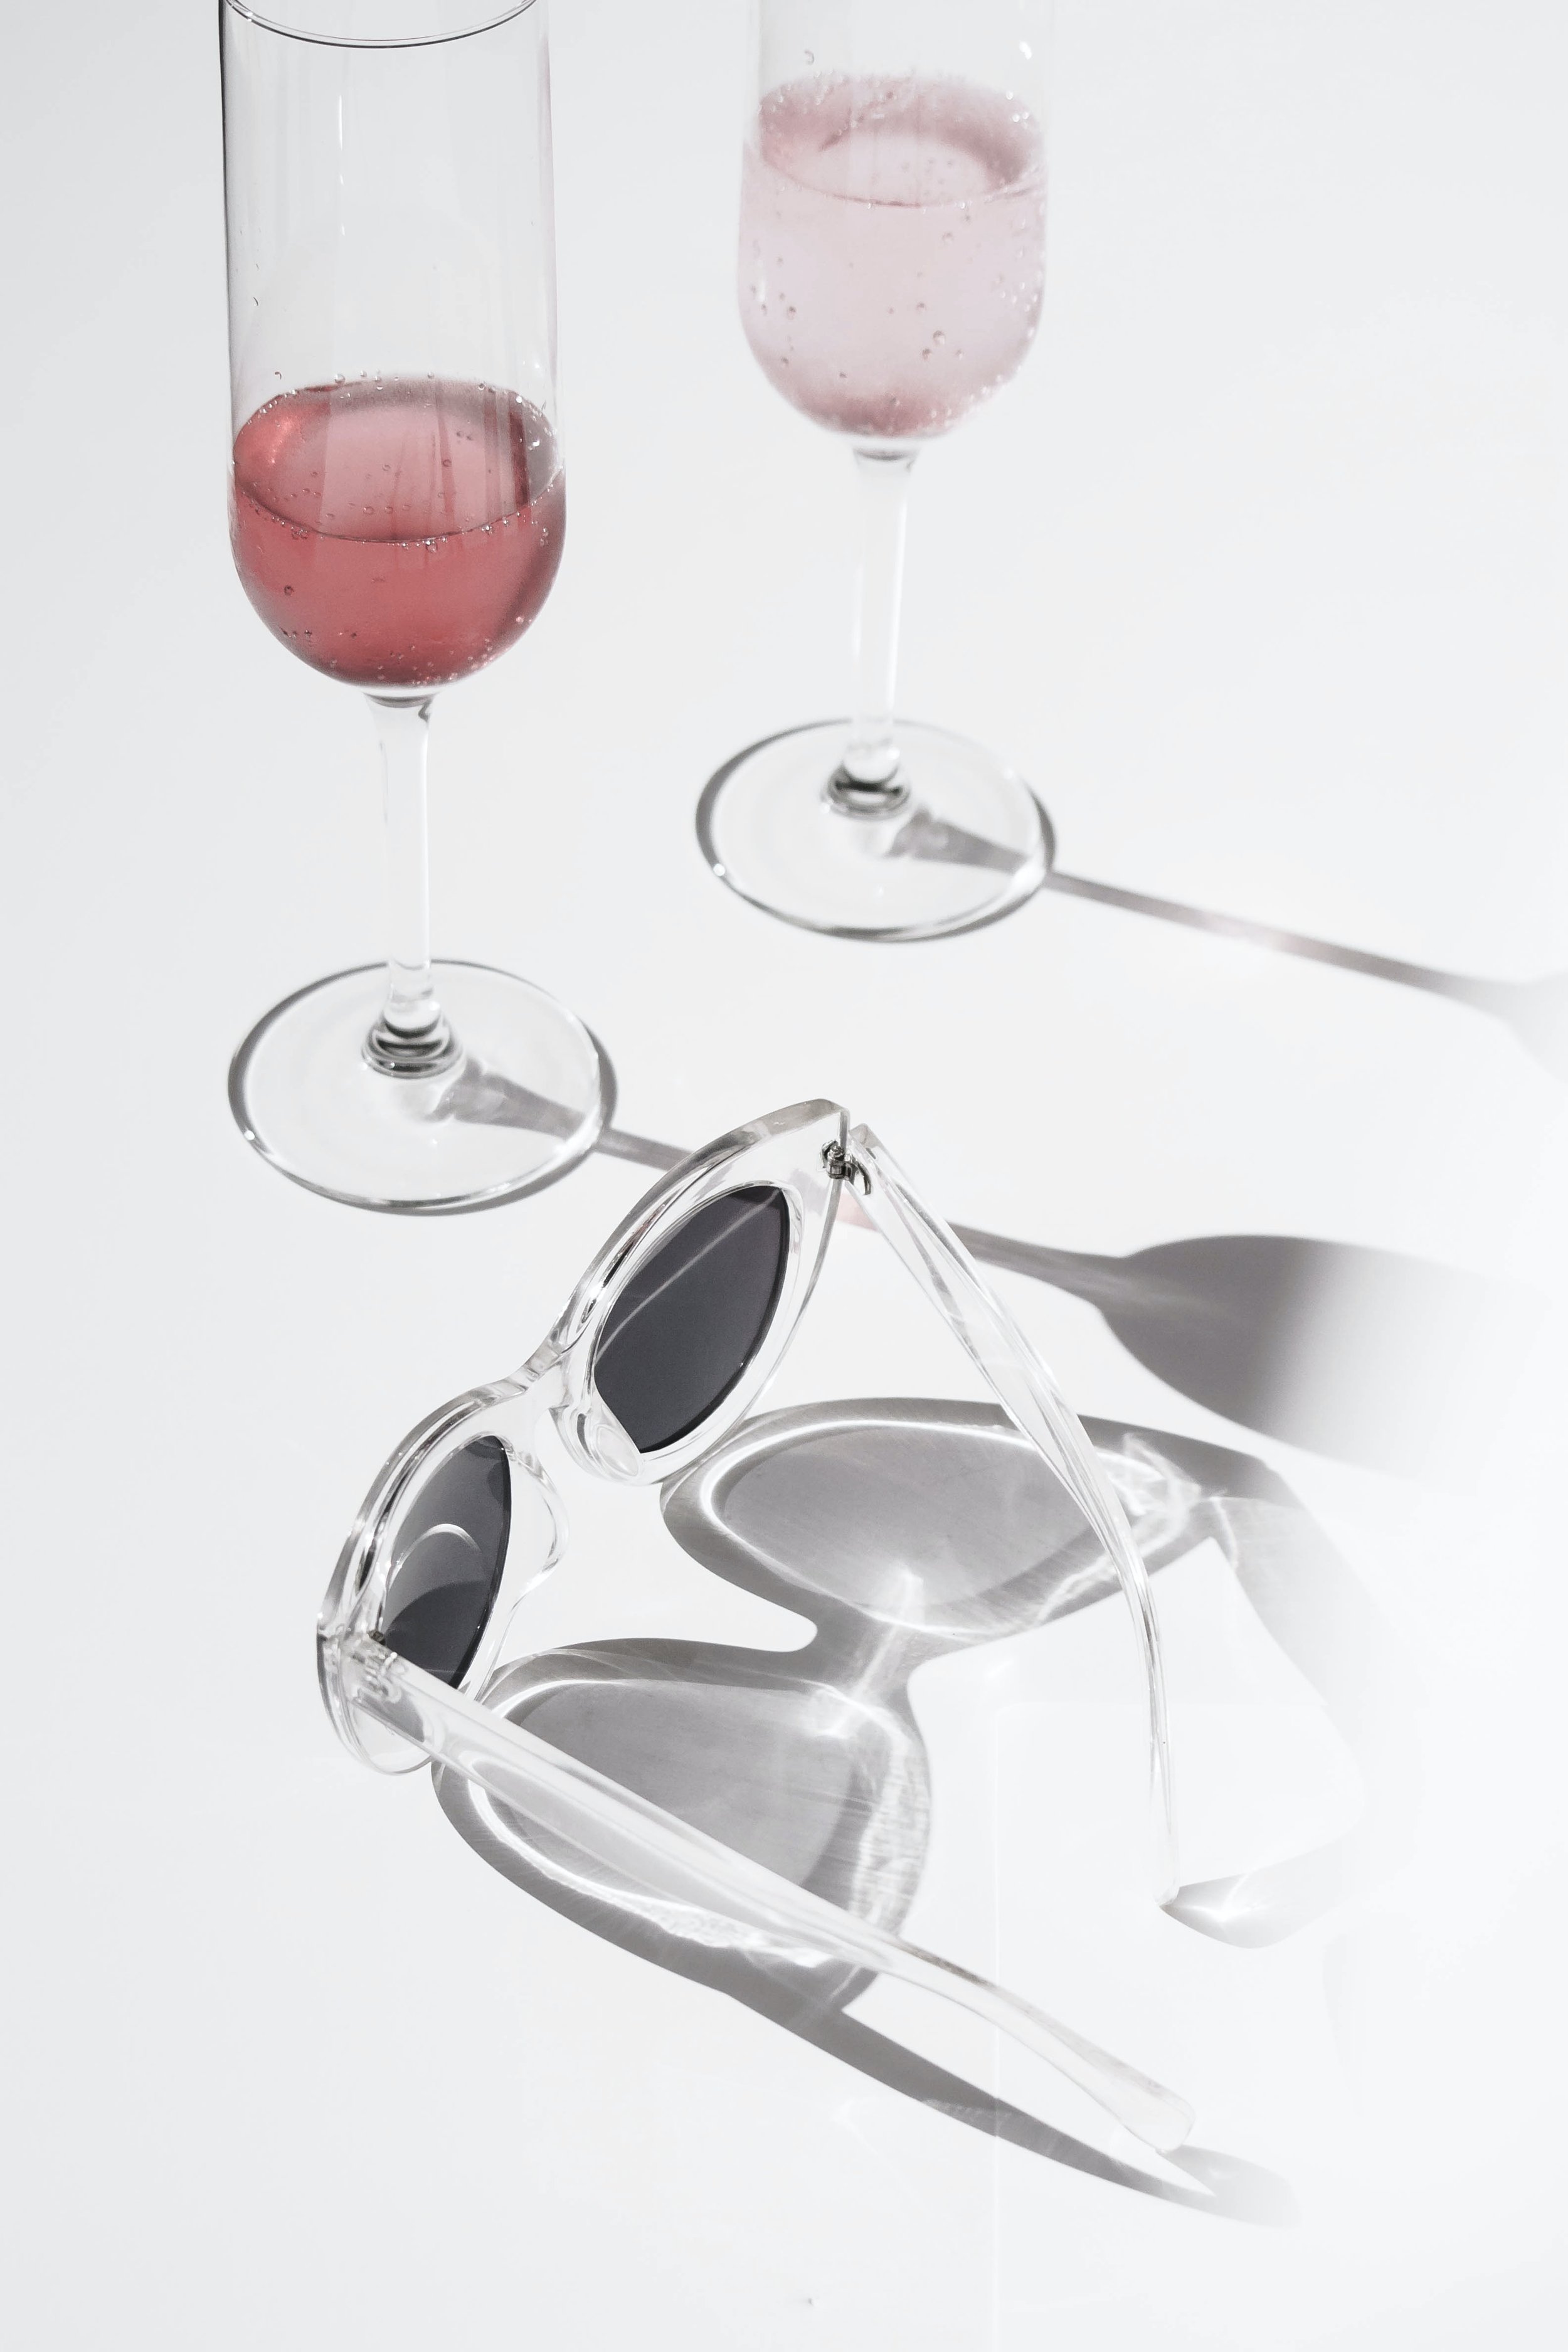 Benefiting DARE Me and My Pet Wine Drinking Set 